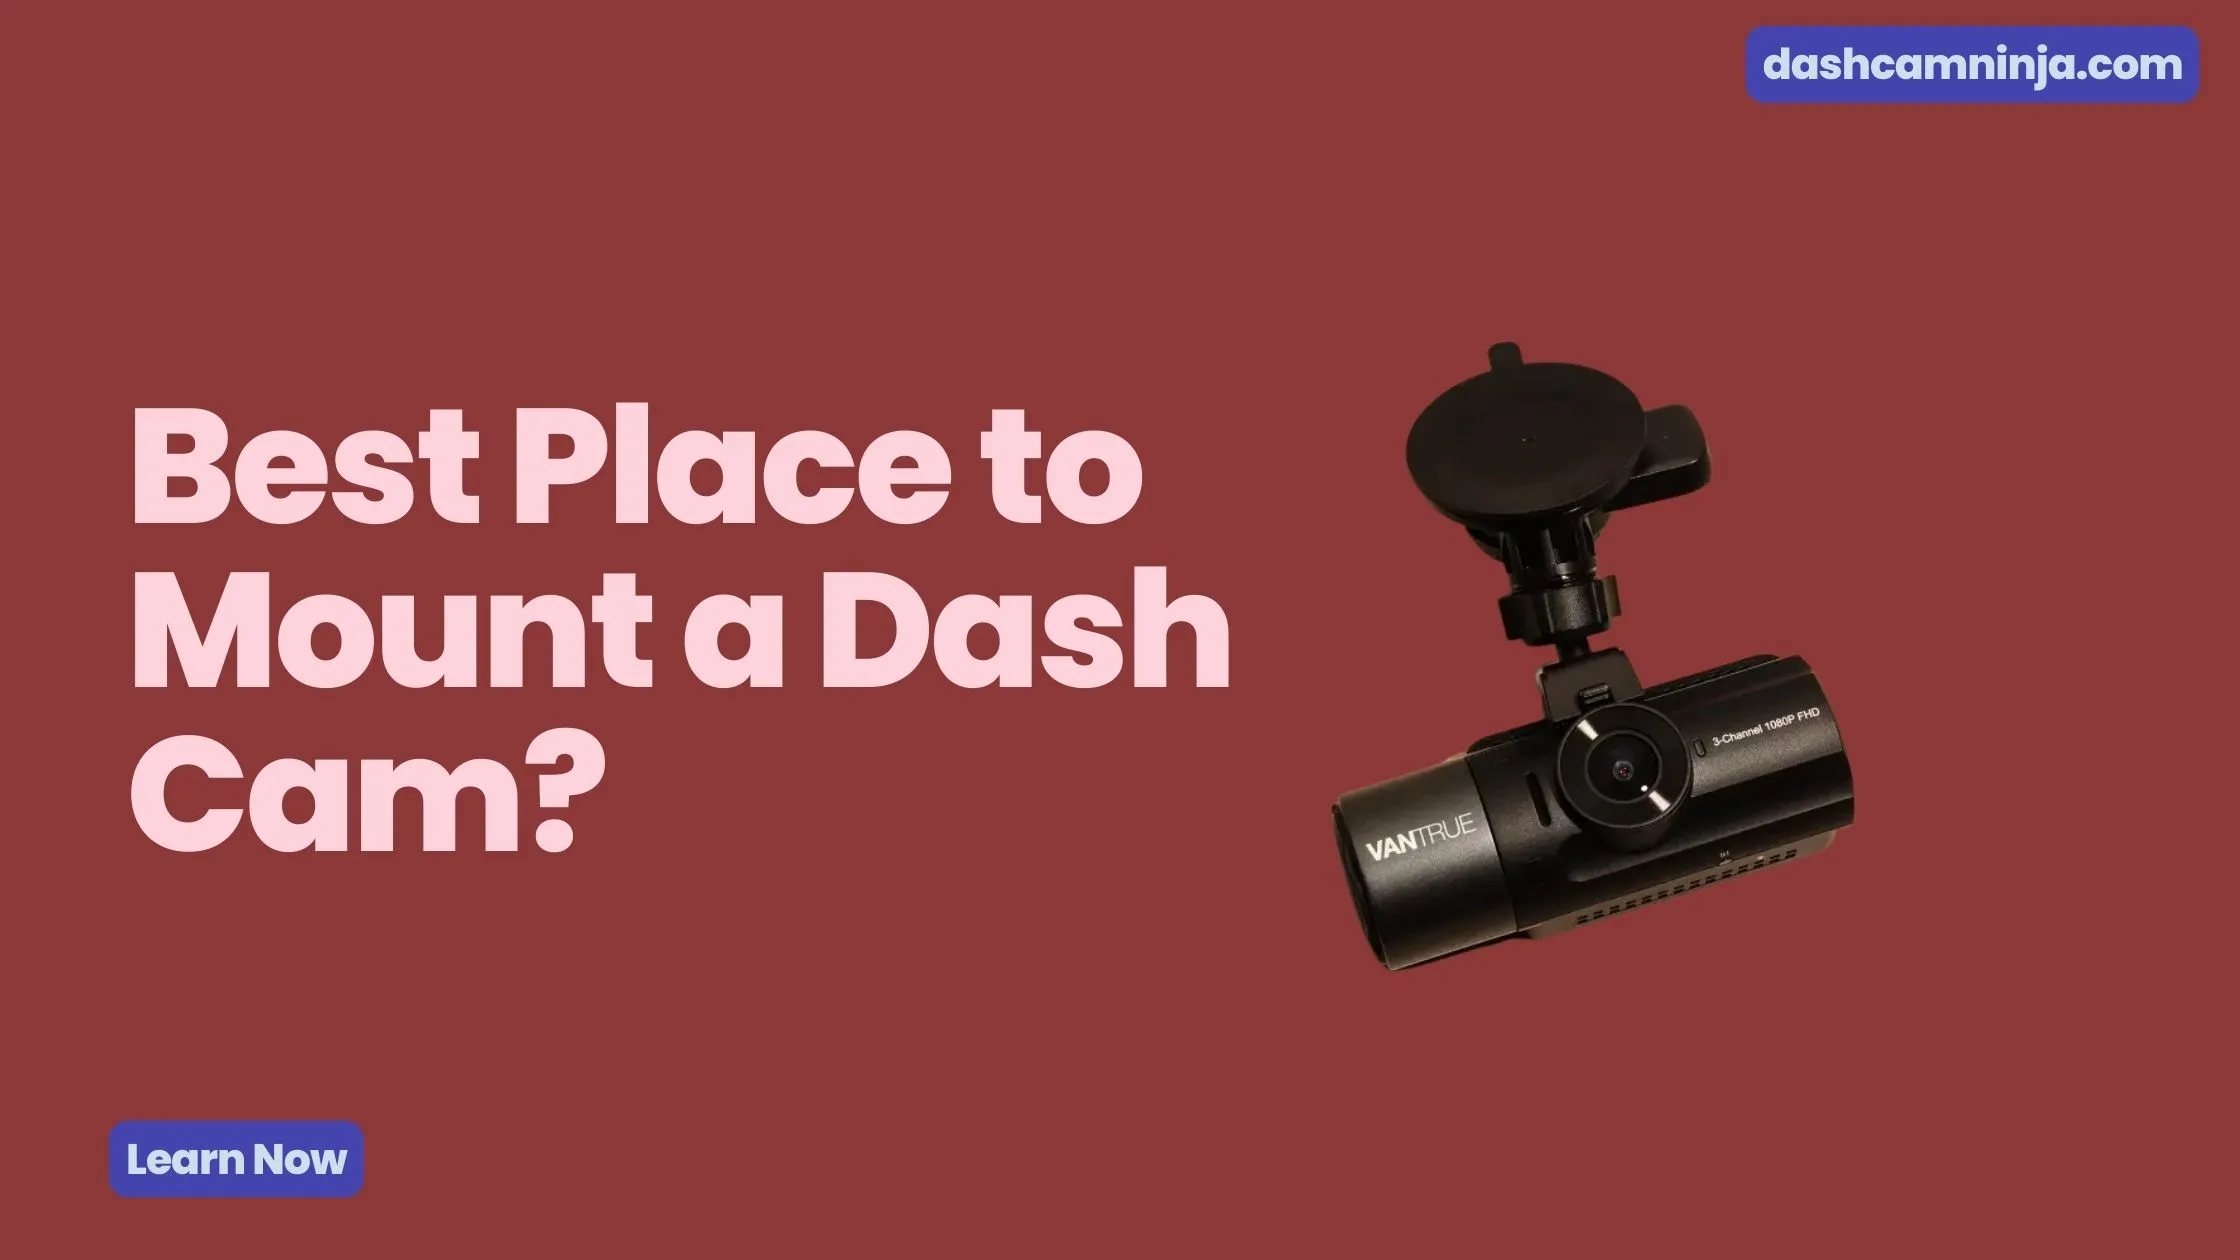 Best Place to Mount a Dash Cam?